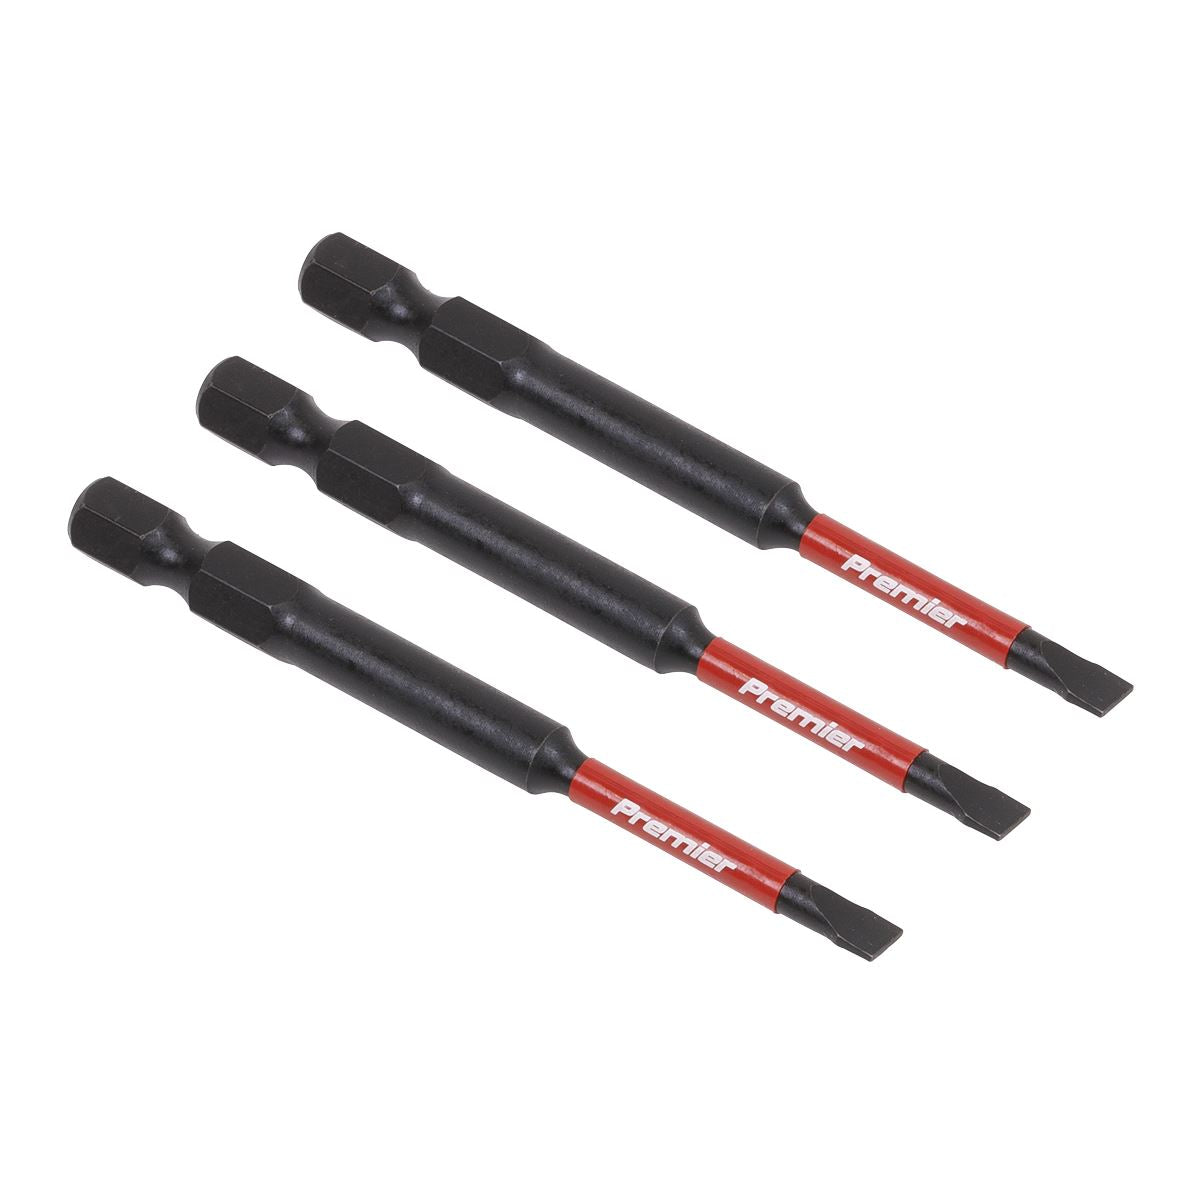 Sealey Premier Slotted 4.5mm Impact Power Tool Bits 75mm - 3pc